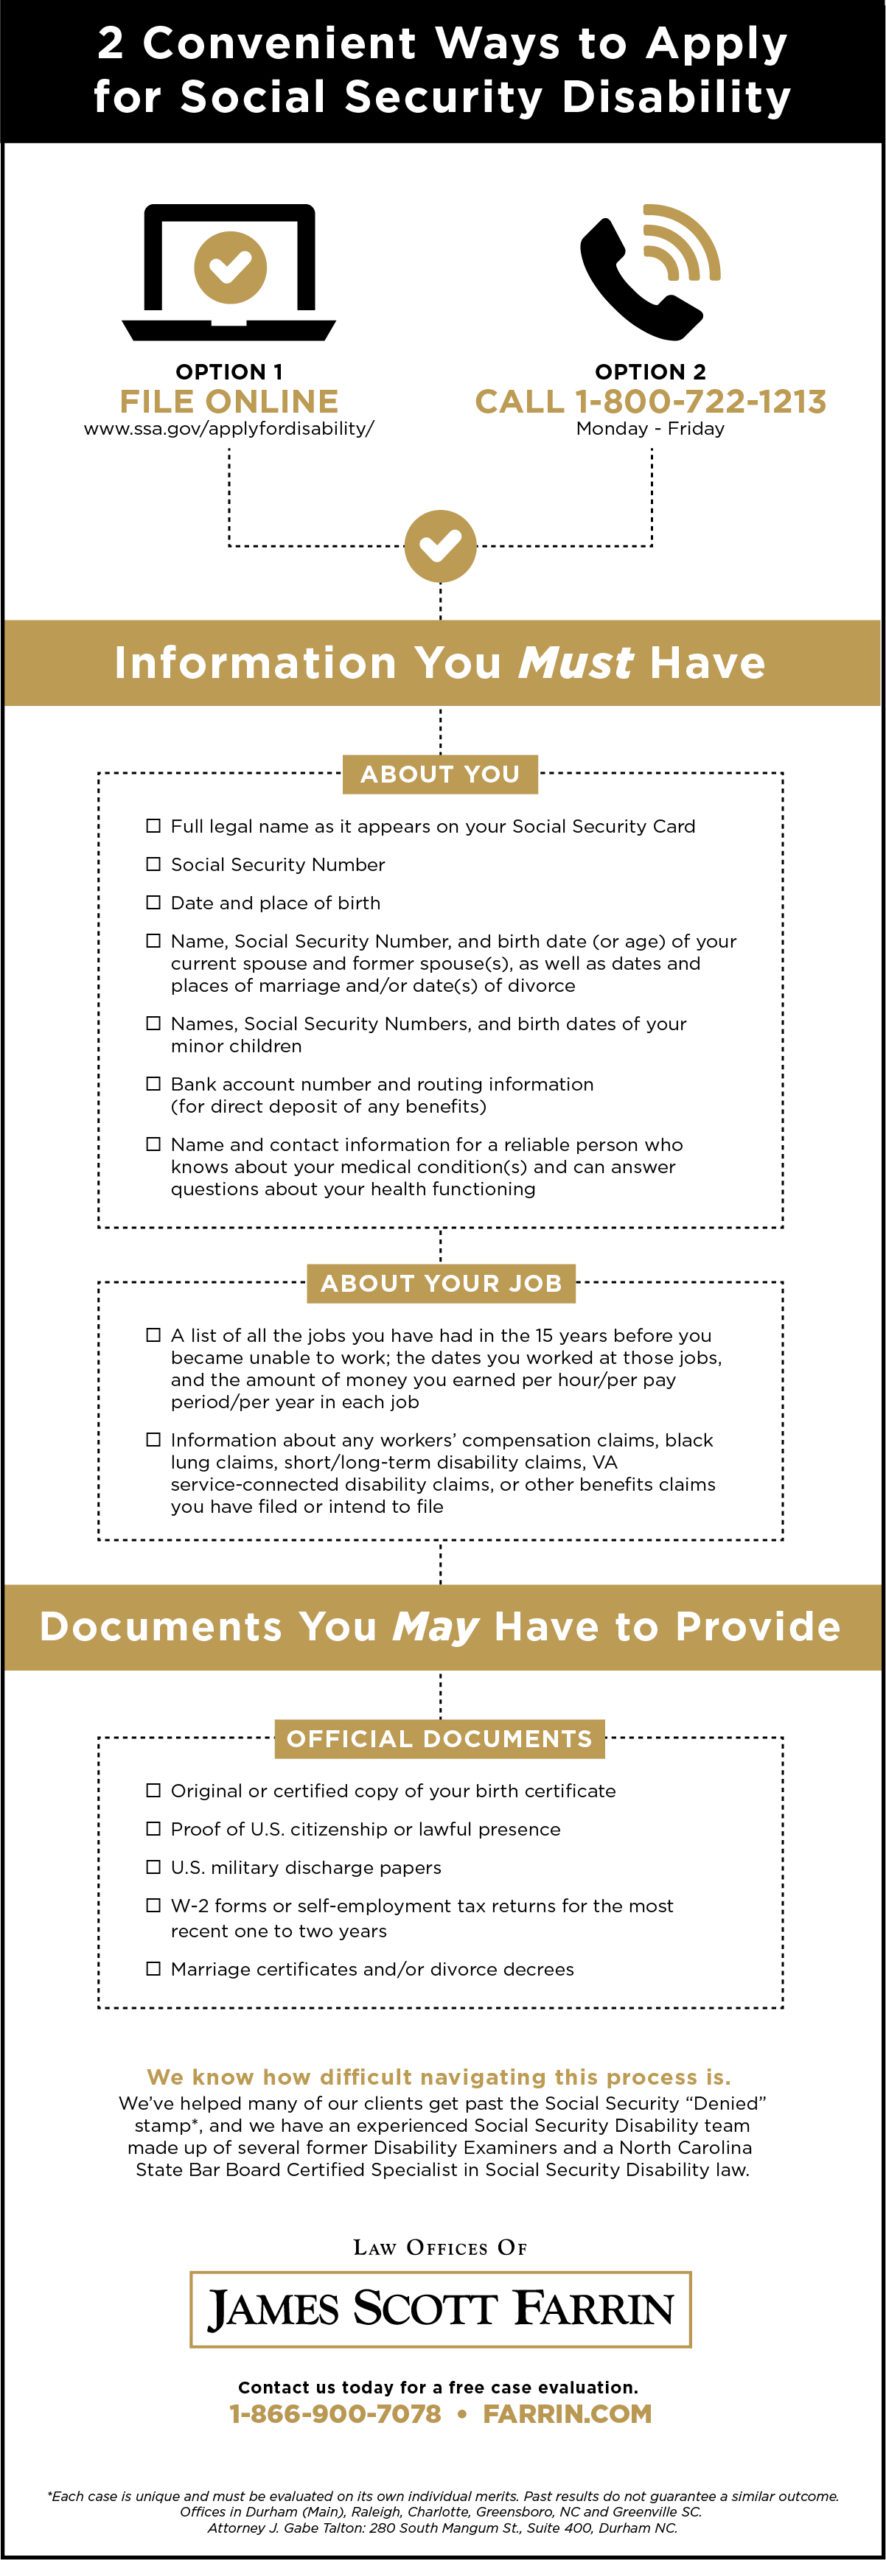 Two easy ways to apply for Social Security Disability, and info & documents you must or may need.